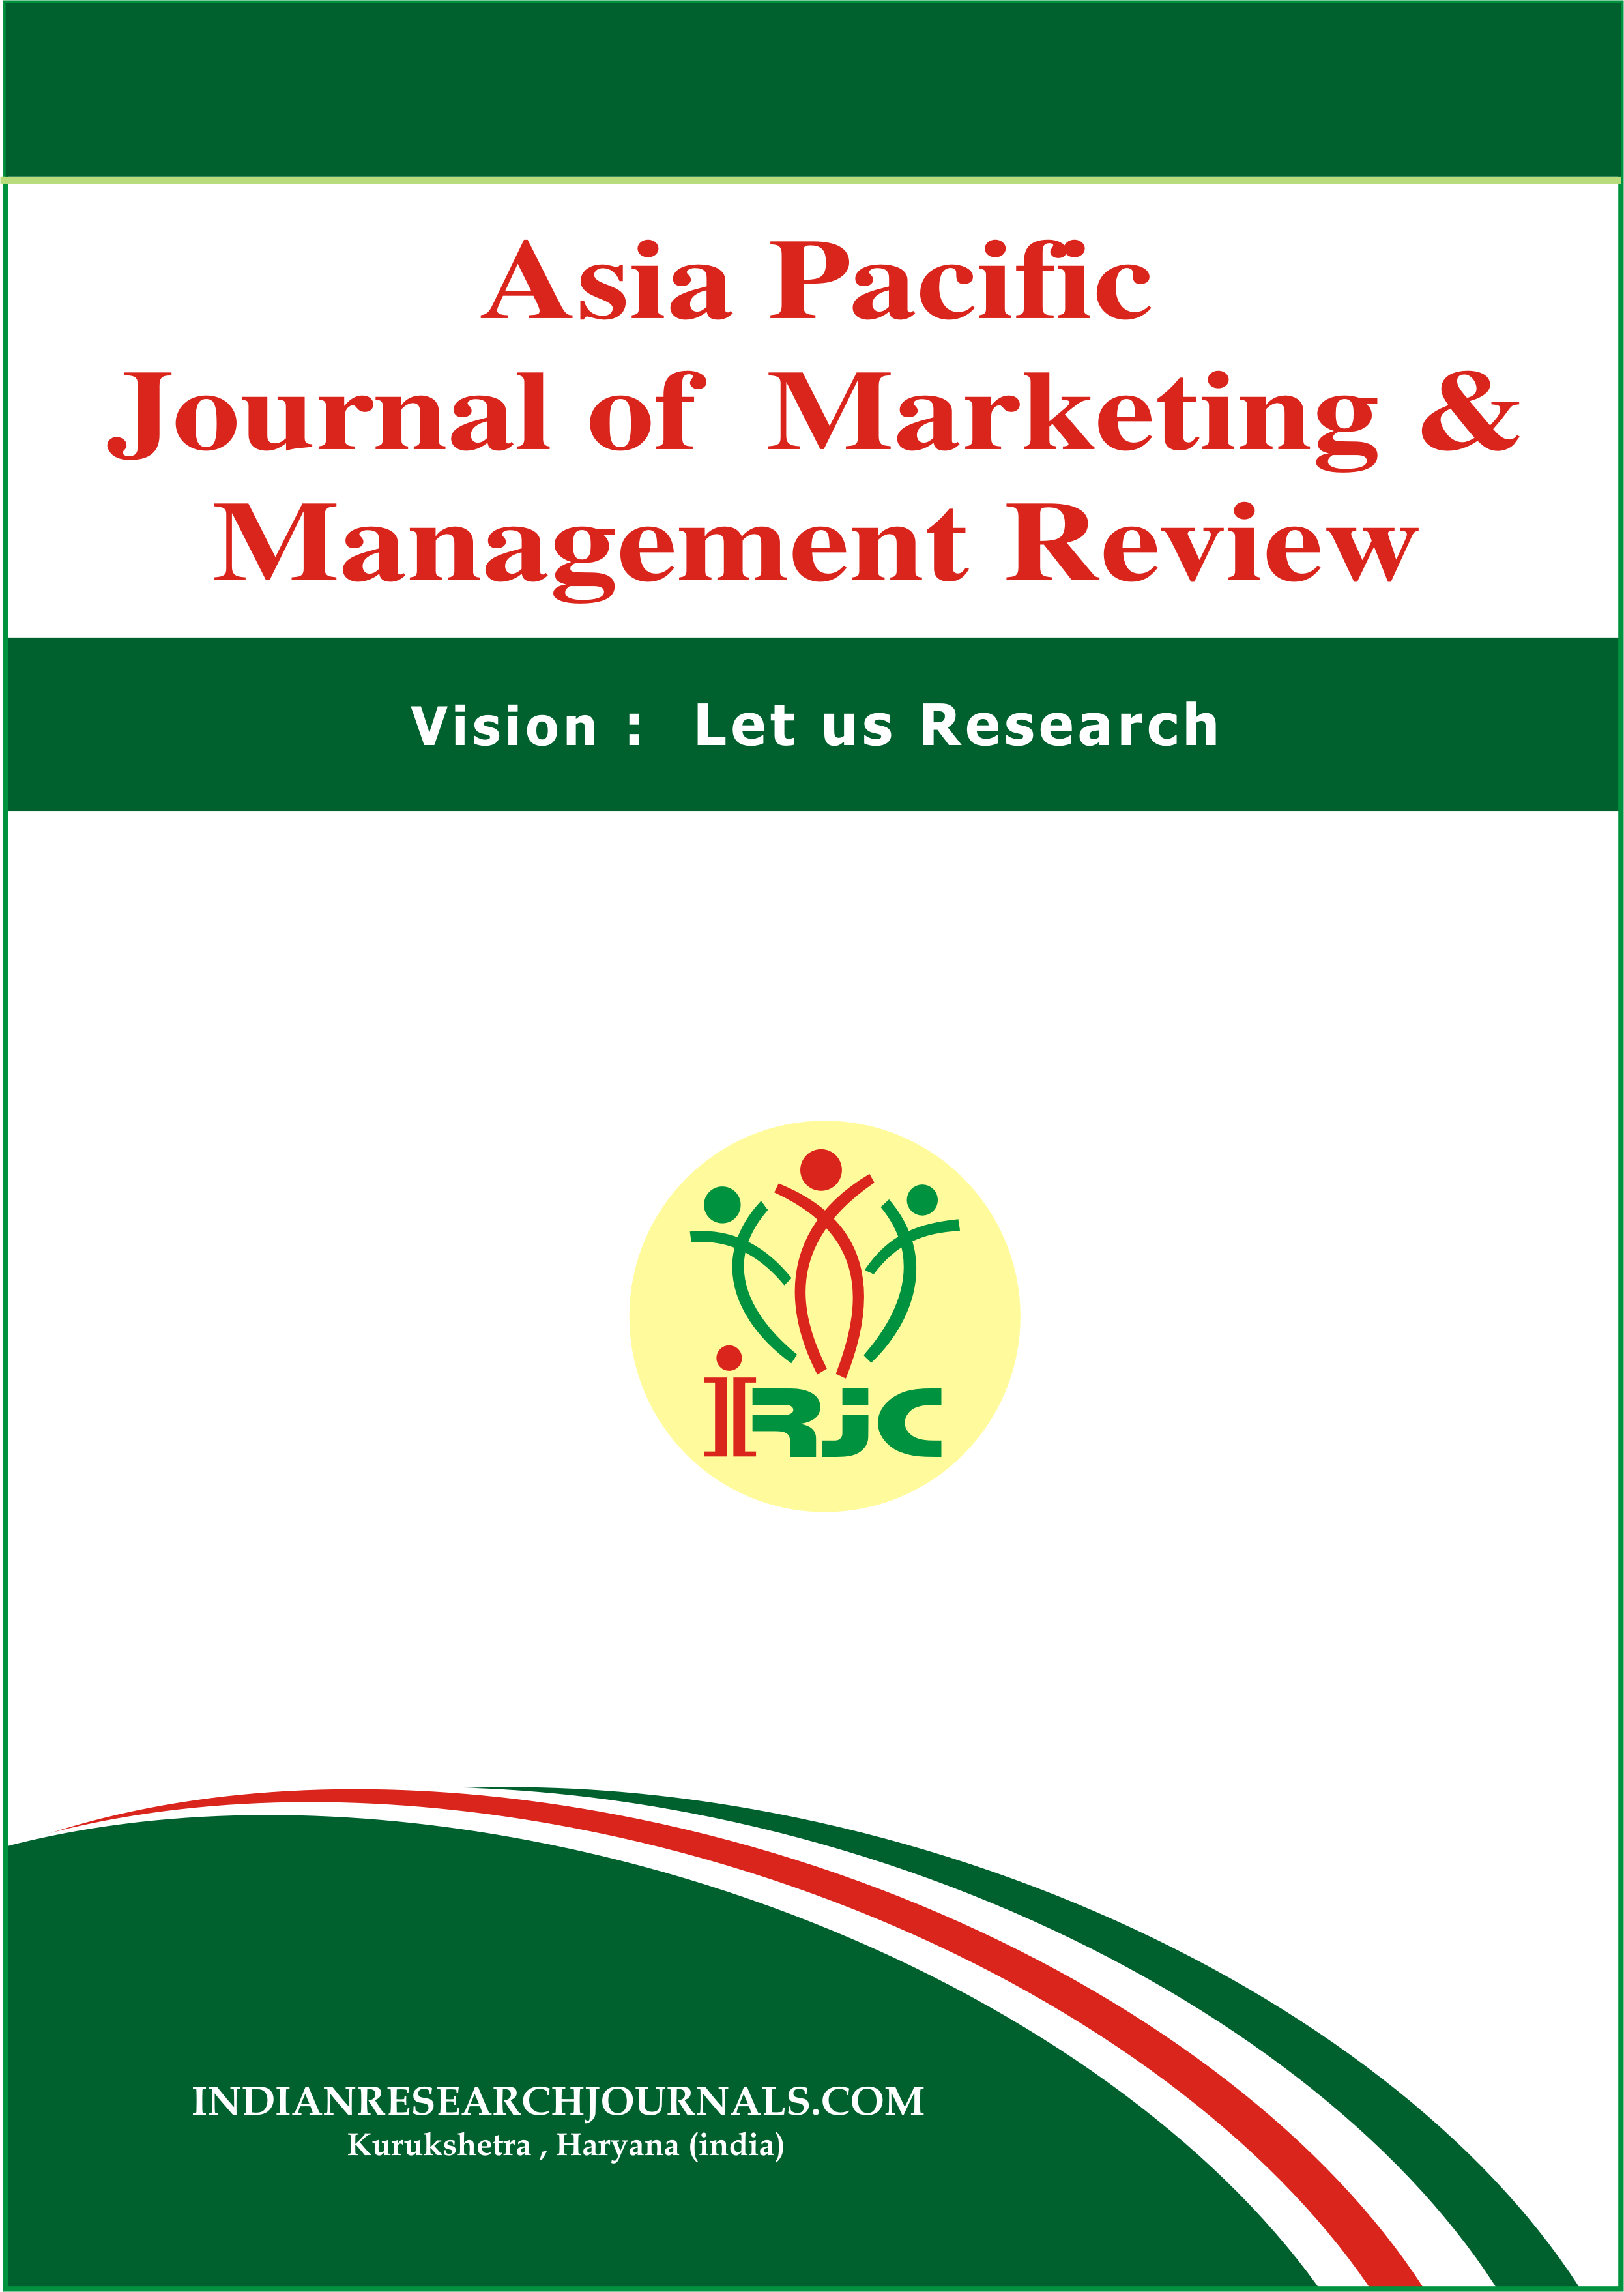 					View Vol. 11 No. 01 (2022): ASIA PACIFIC JOURNAL OF MARKETING & MANAGEMENT REVIEW
				